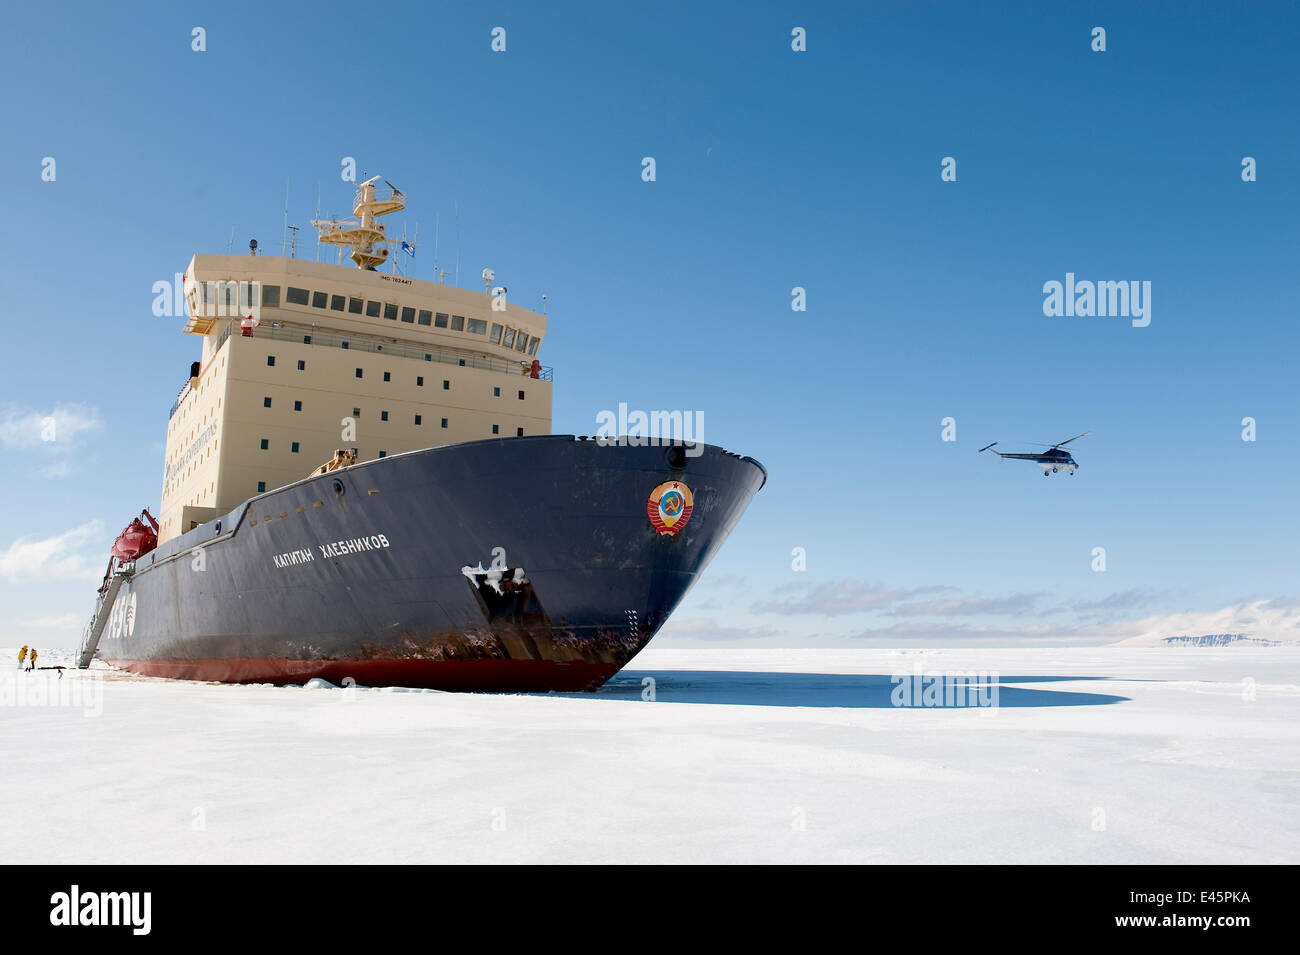 People disembarking from a Russian ice breaker ship, Kapitan Khlebnikov, amongst sea ice on a Quark expedition, Helipcopter flying in background, Ross Sea, Antarctica, November 2008 Stock Photo